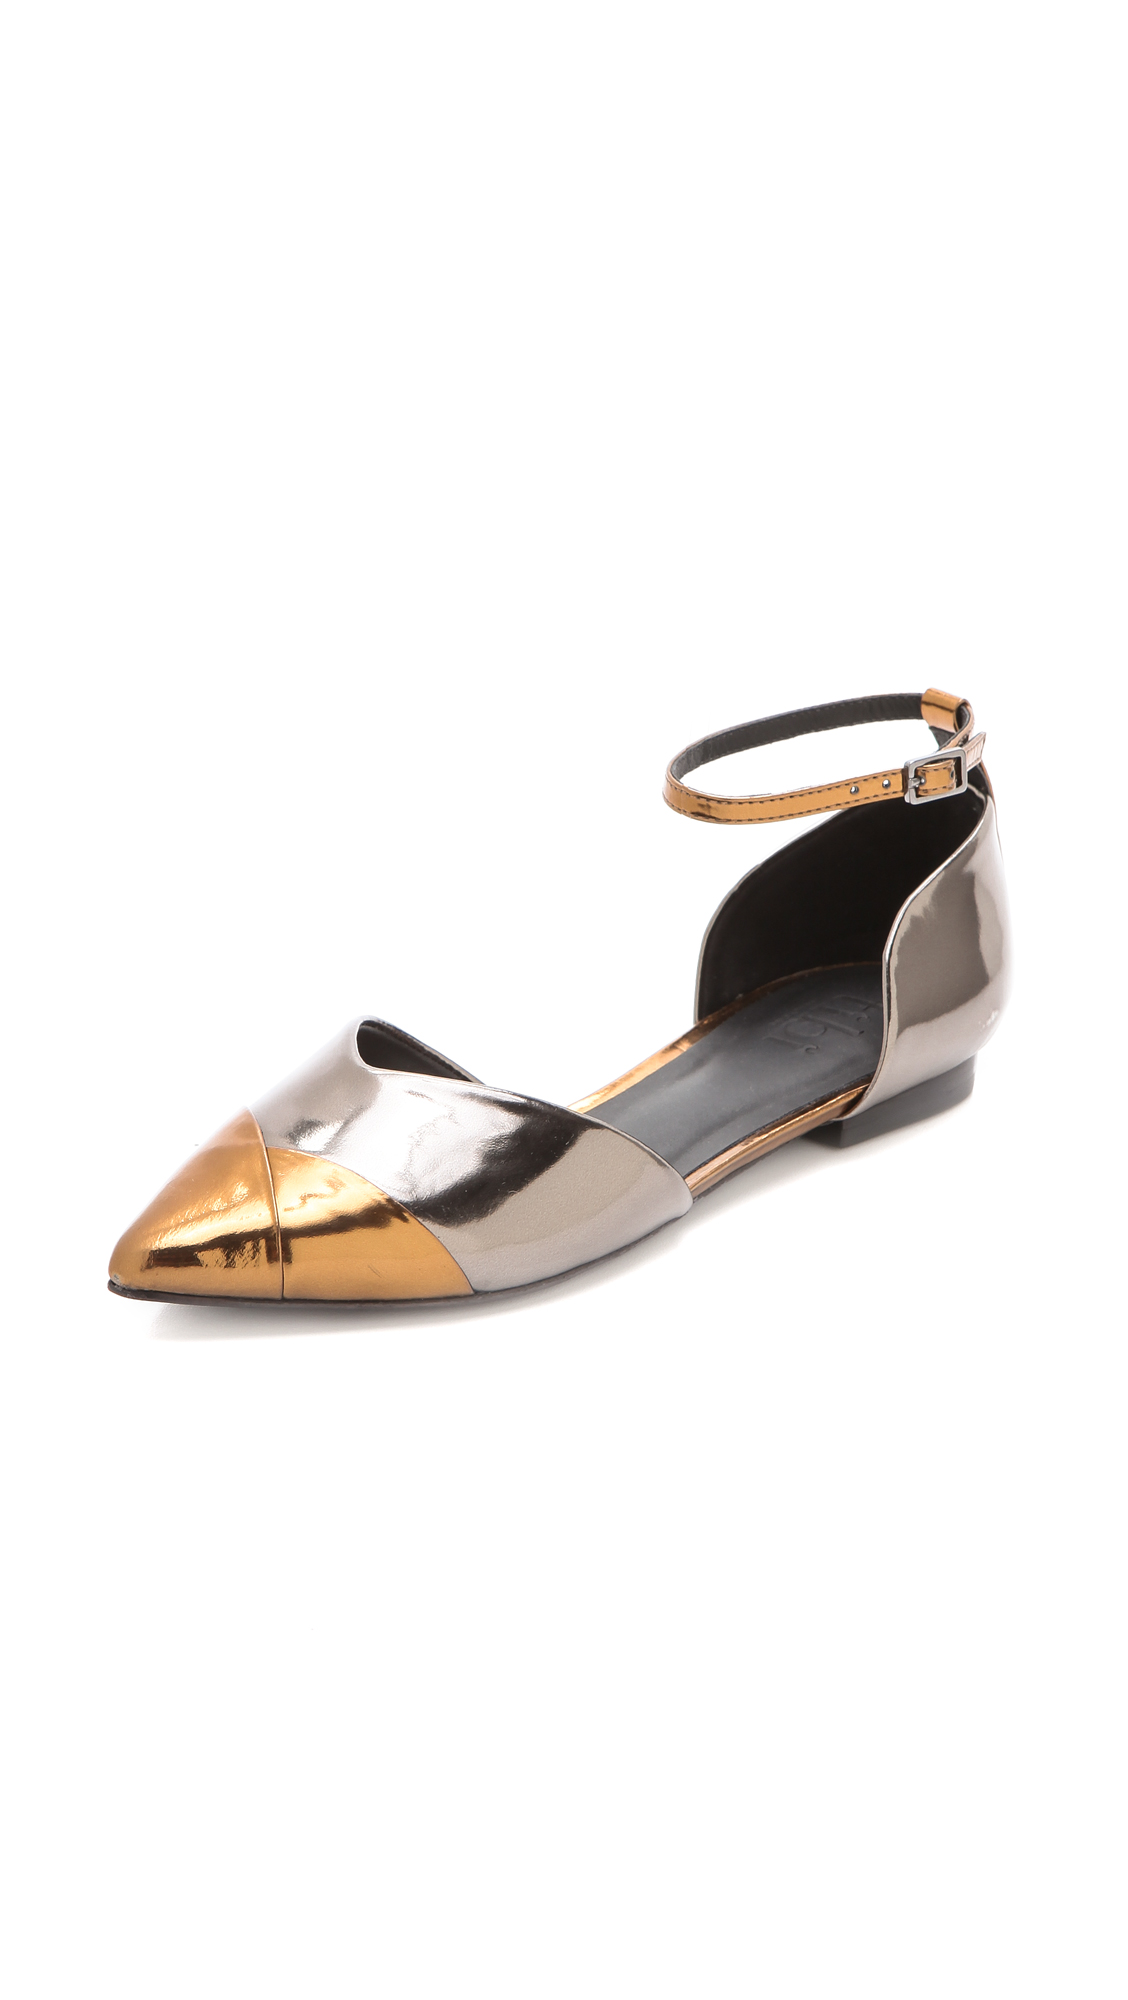 Tibi Cody Dorsay Flats with Ankle Strap in Metallic - Lyst